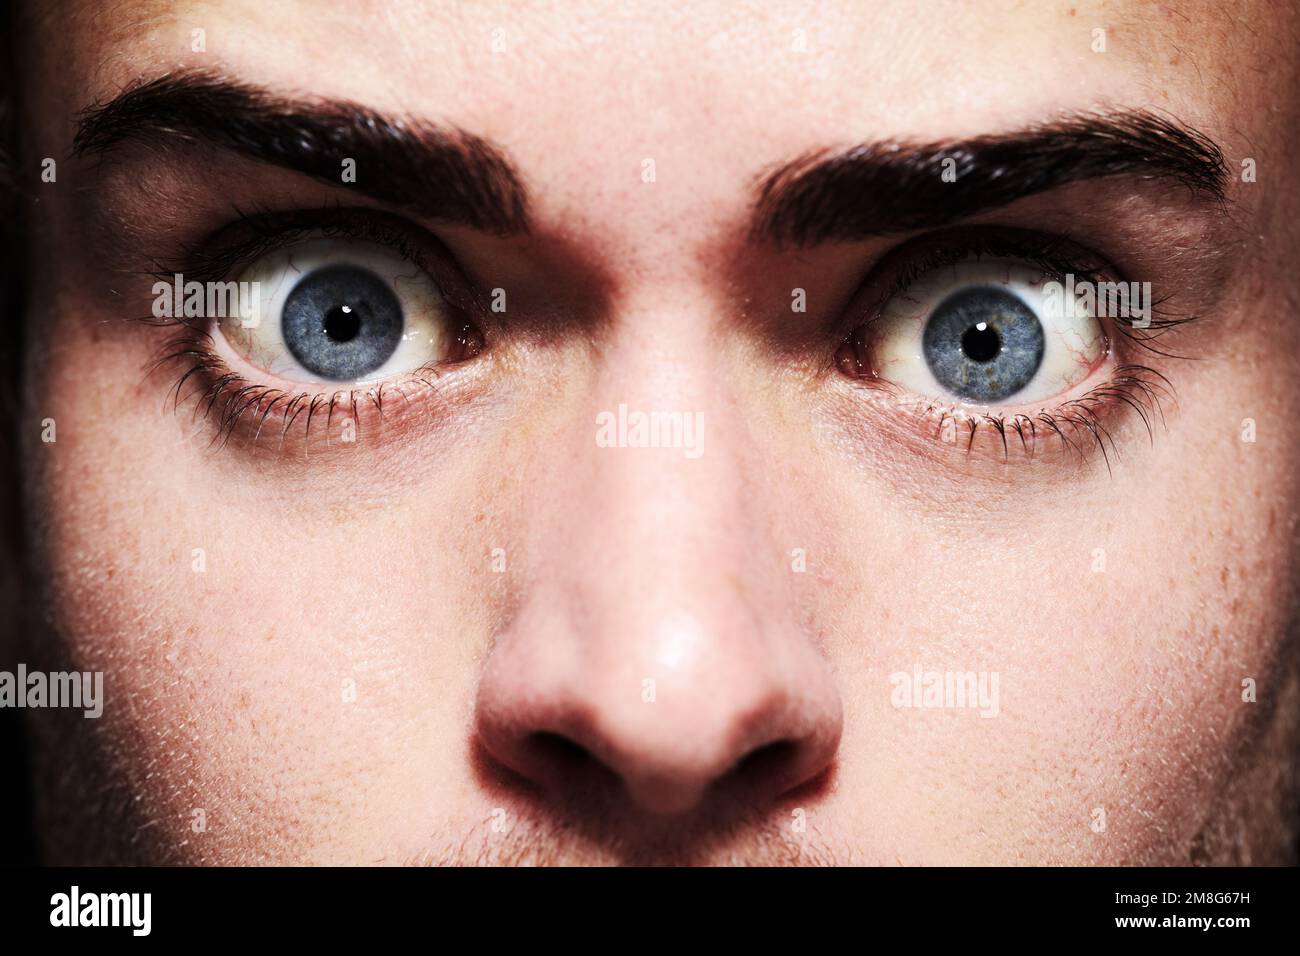 His eyes give away his fear. Closeup portrait of a young man with wide eyes. Stock Photo